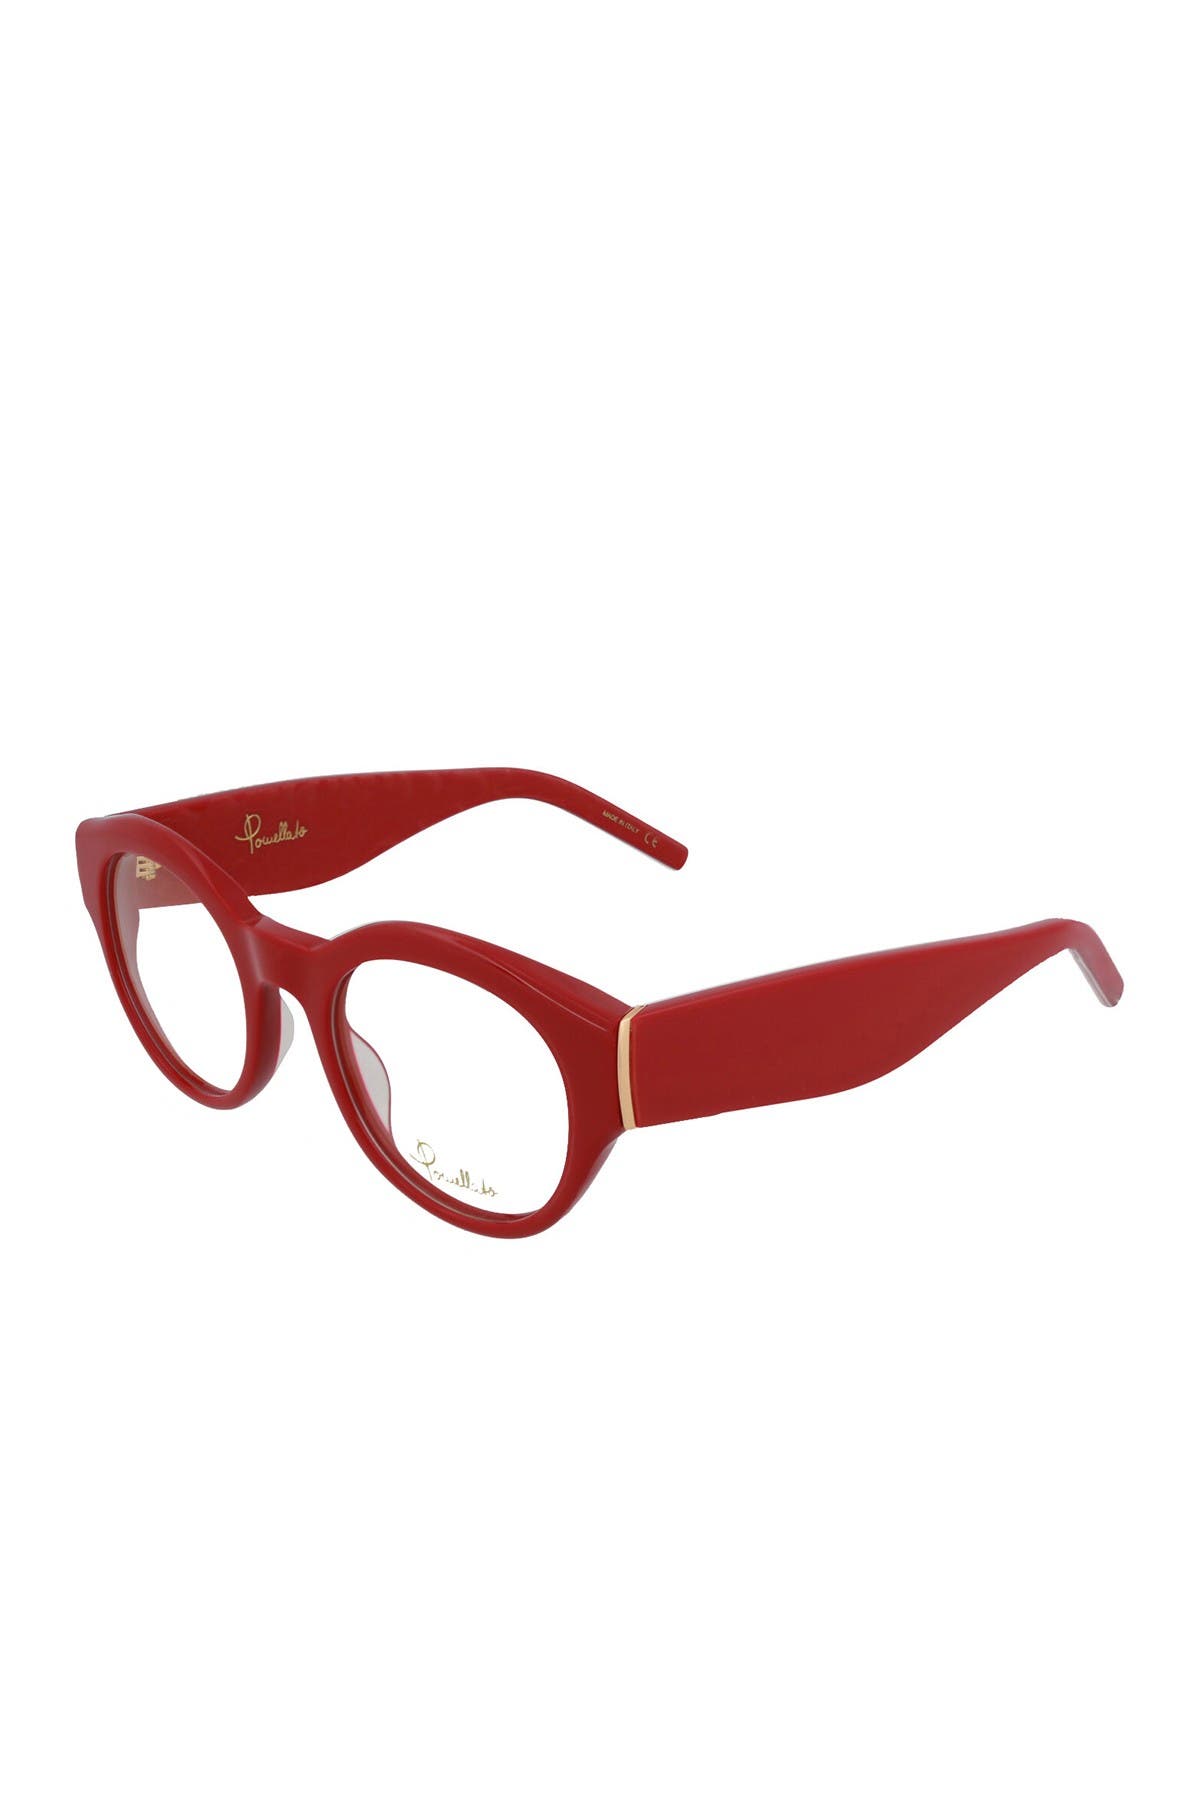 Pomellato 49mm Round Optical Frames In Red Red Transparent